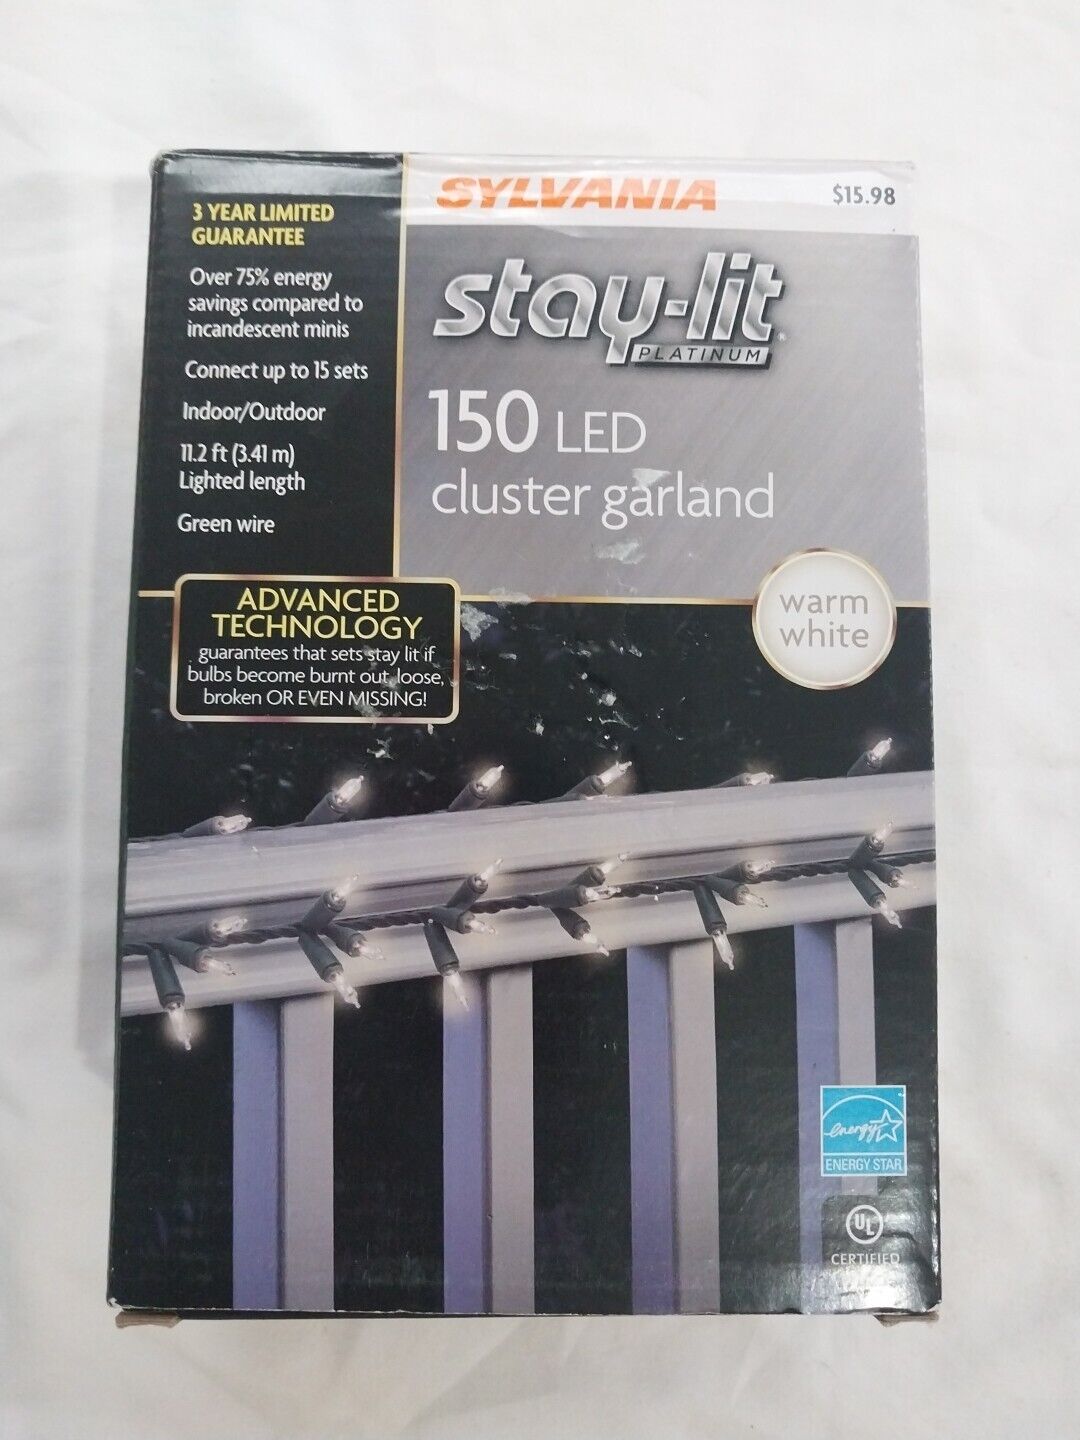 Sylvania Stay-Lit 11.2 ft LED Cluster Garland Warm White Lights  NEW